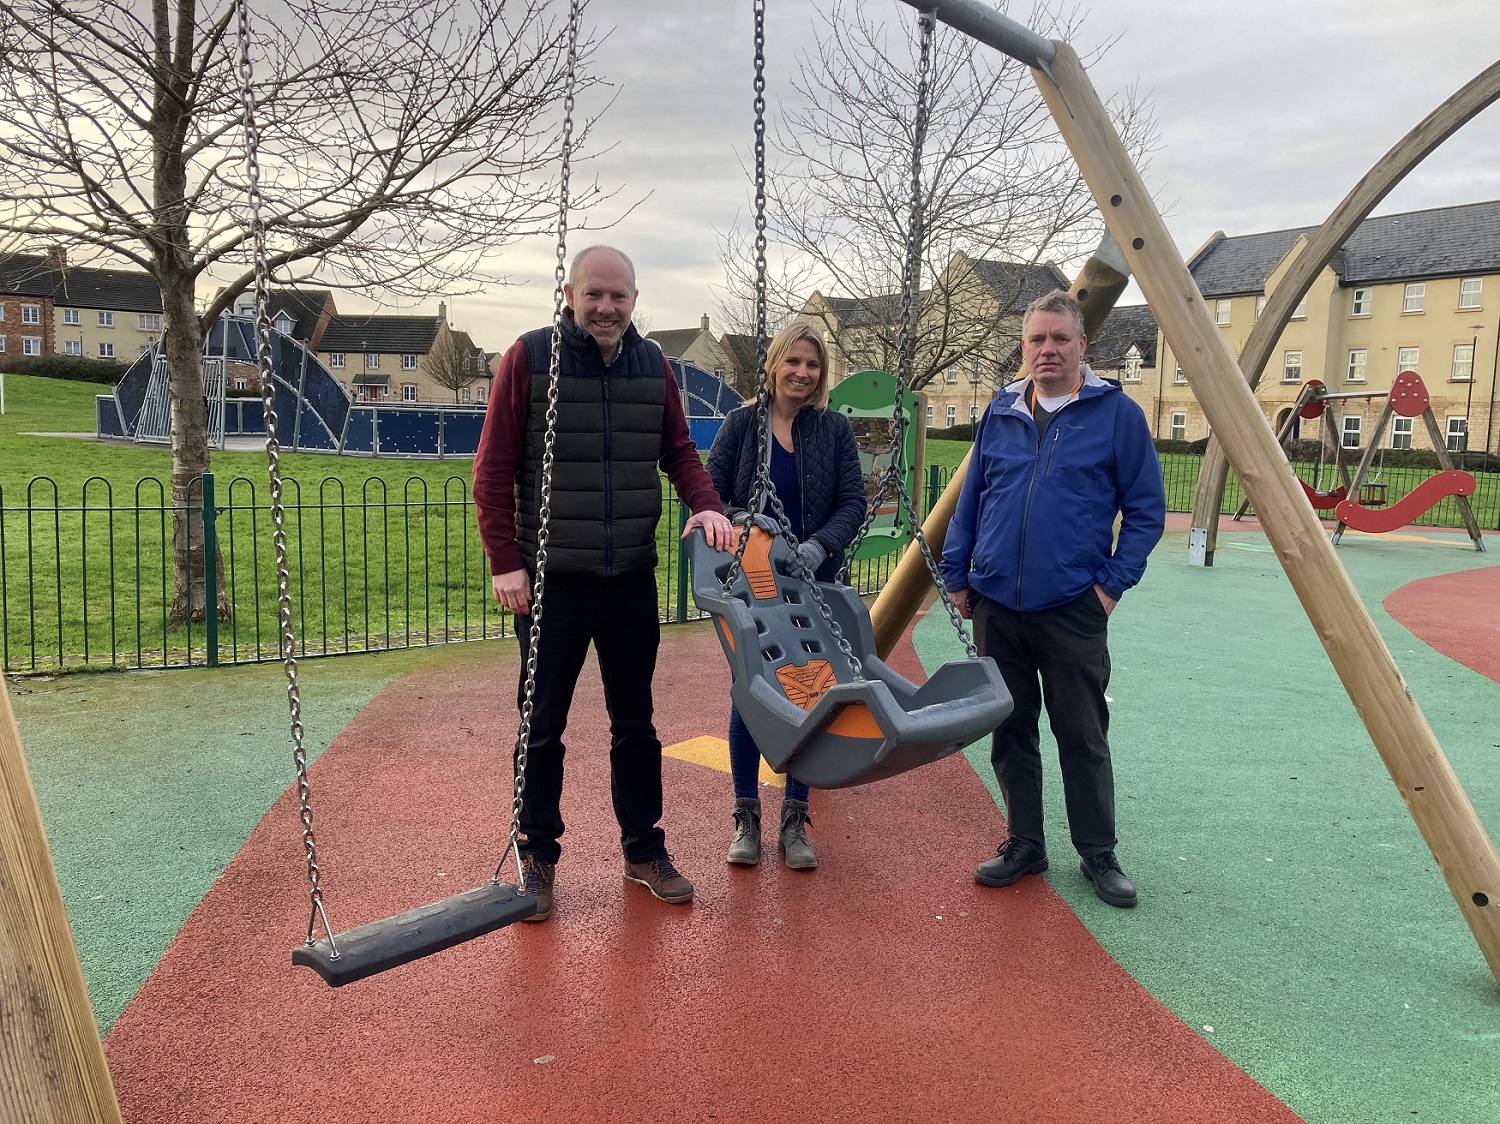 Becky Maddern's Accessible Play Park Campaign Highlighted By BBC